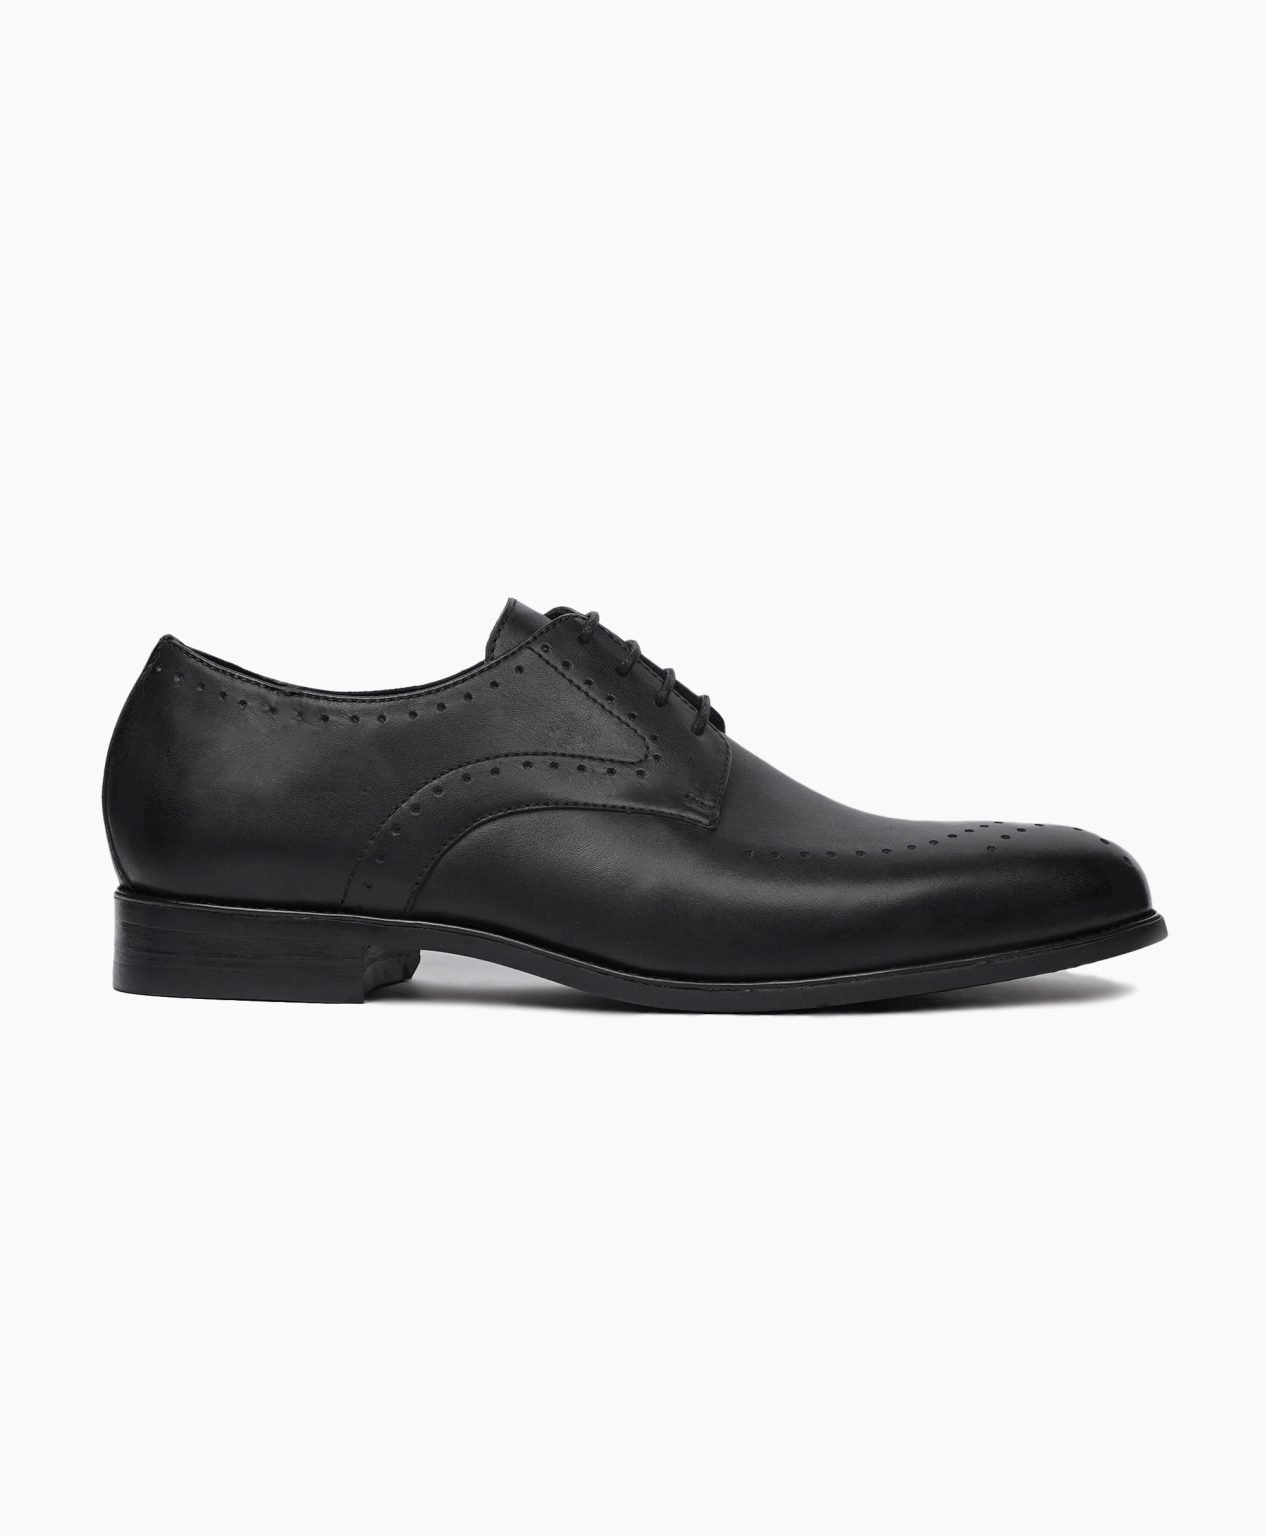 matlock-derby-black-leather-shoes-image201